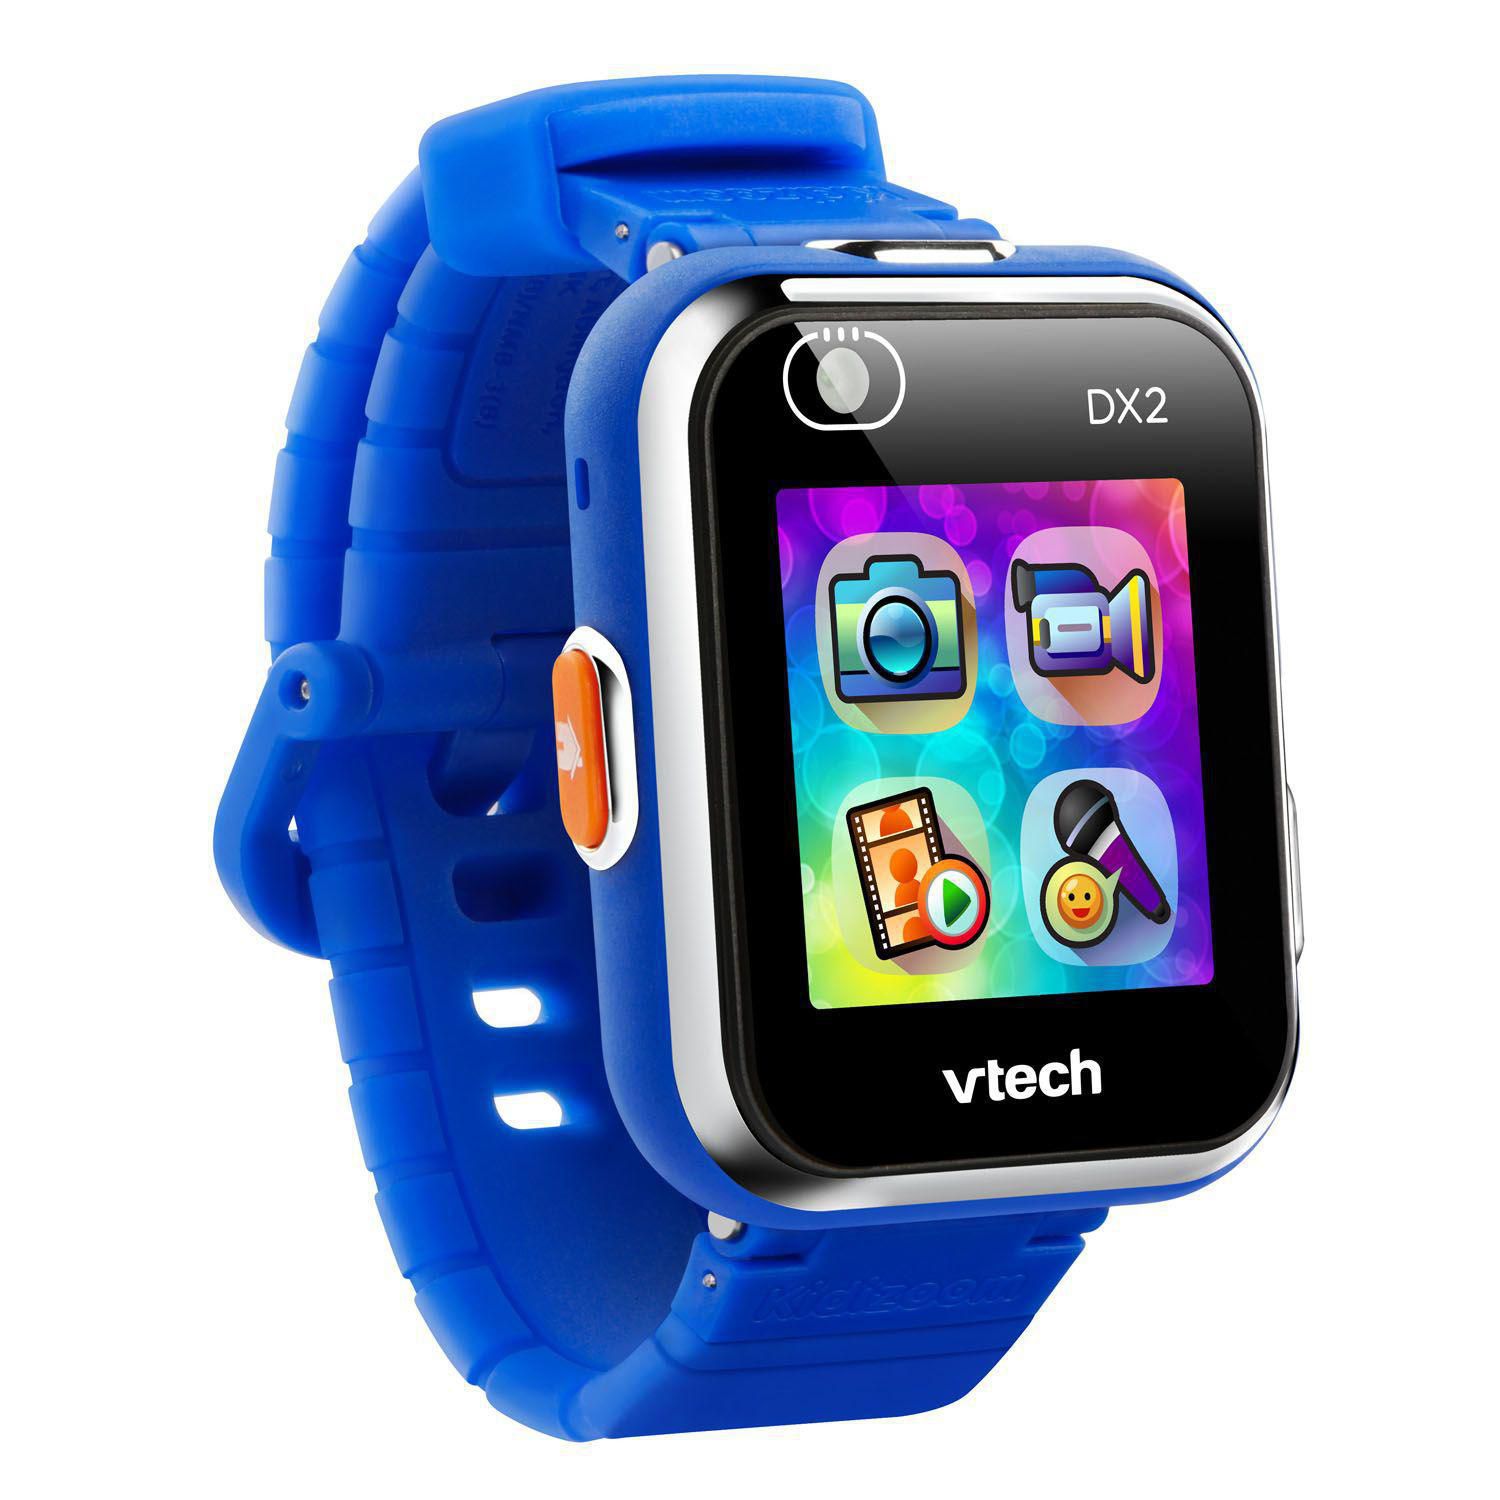 New VTech  Kidizoom DX2 Smartwatch Purple DUAL CAMERAS free shipping 